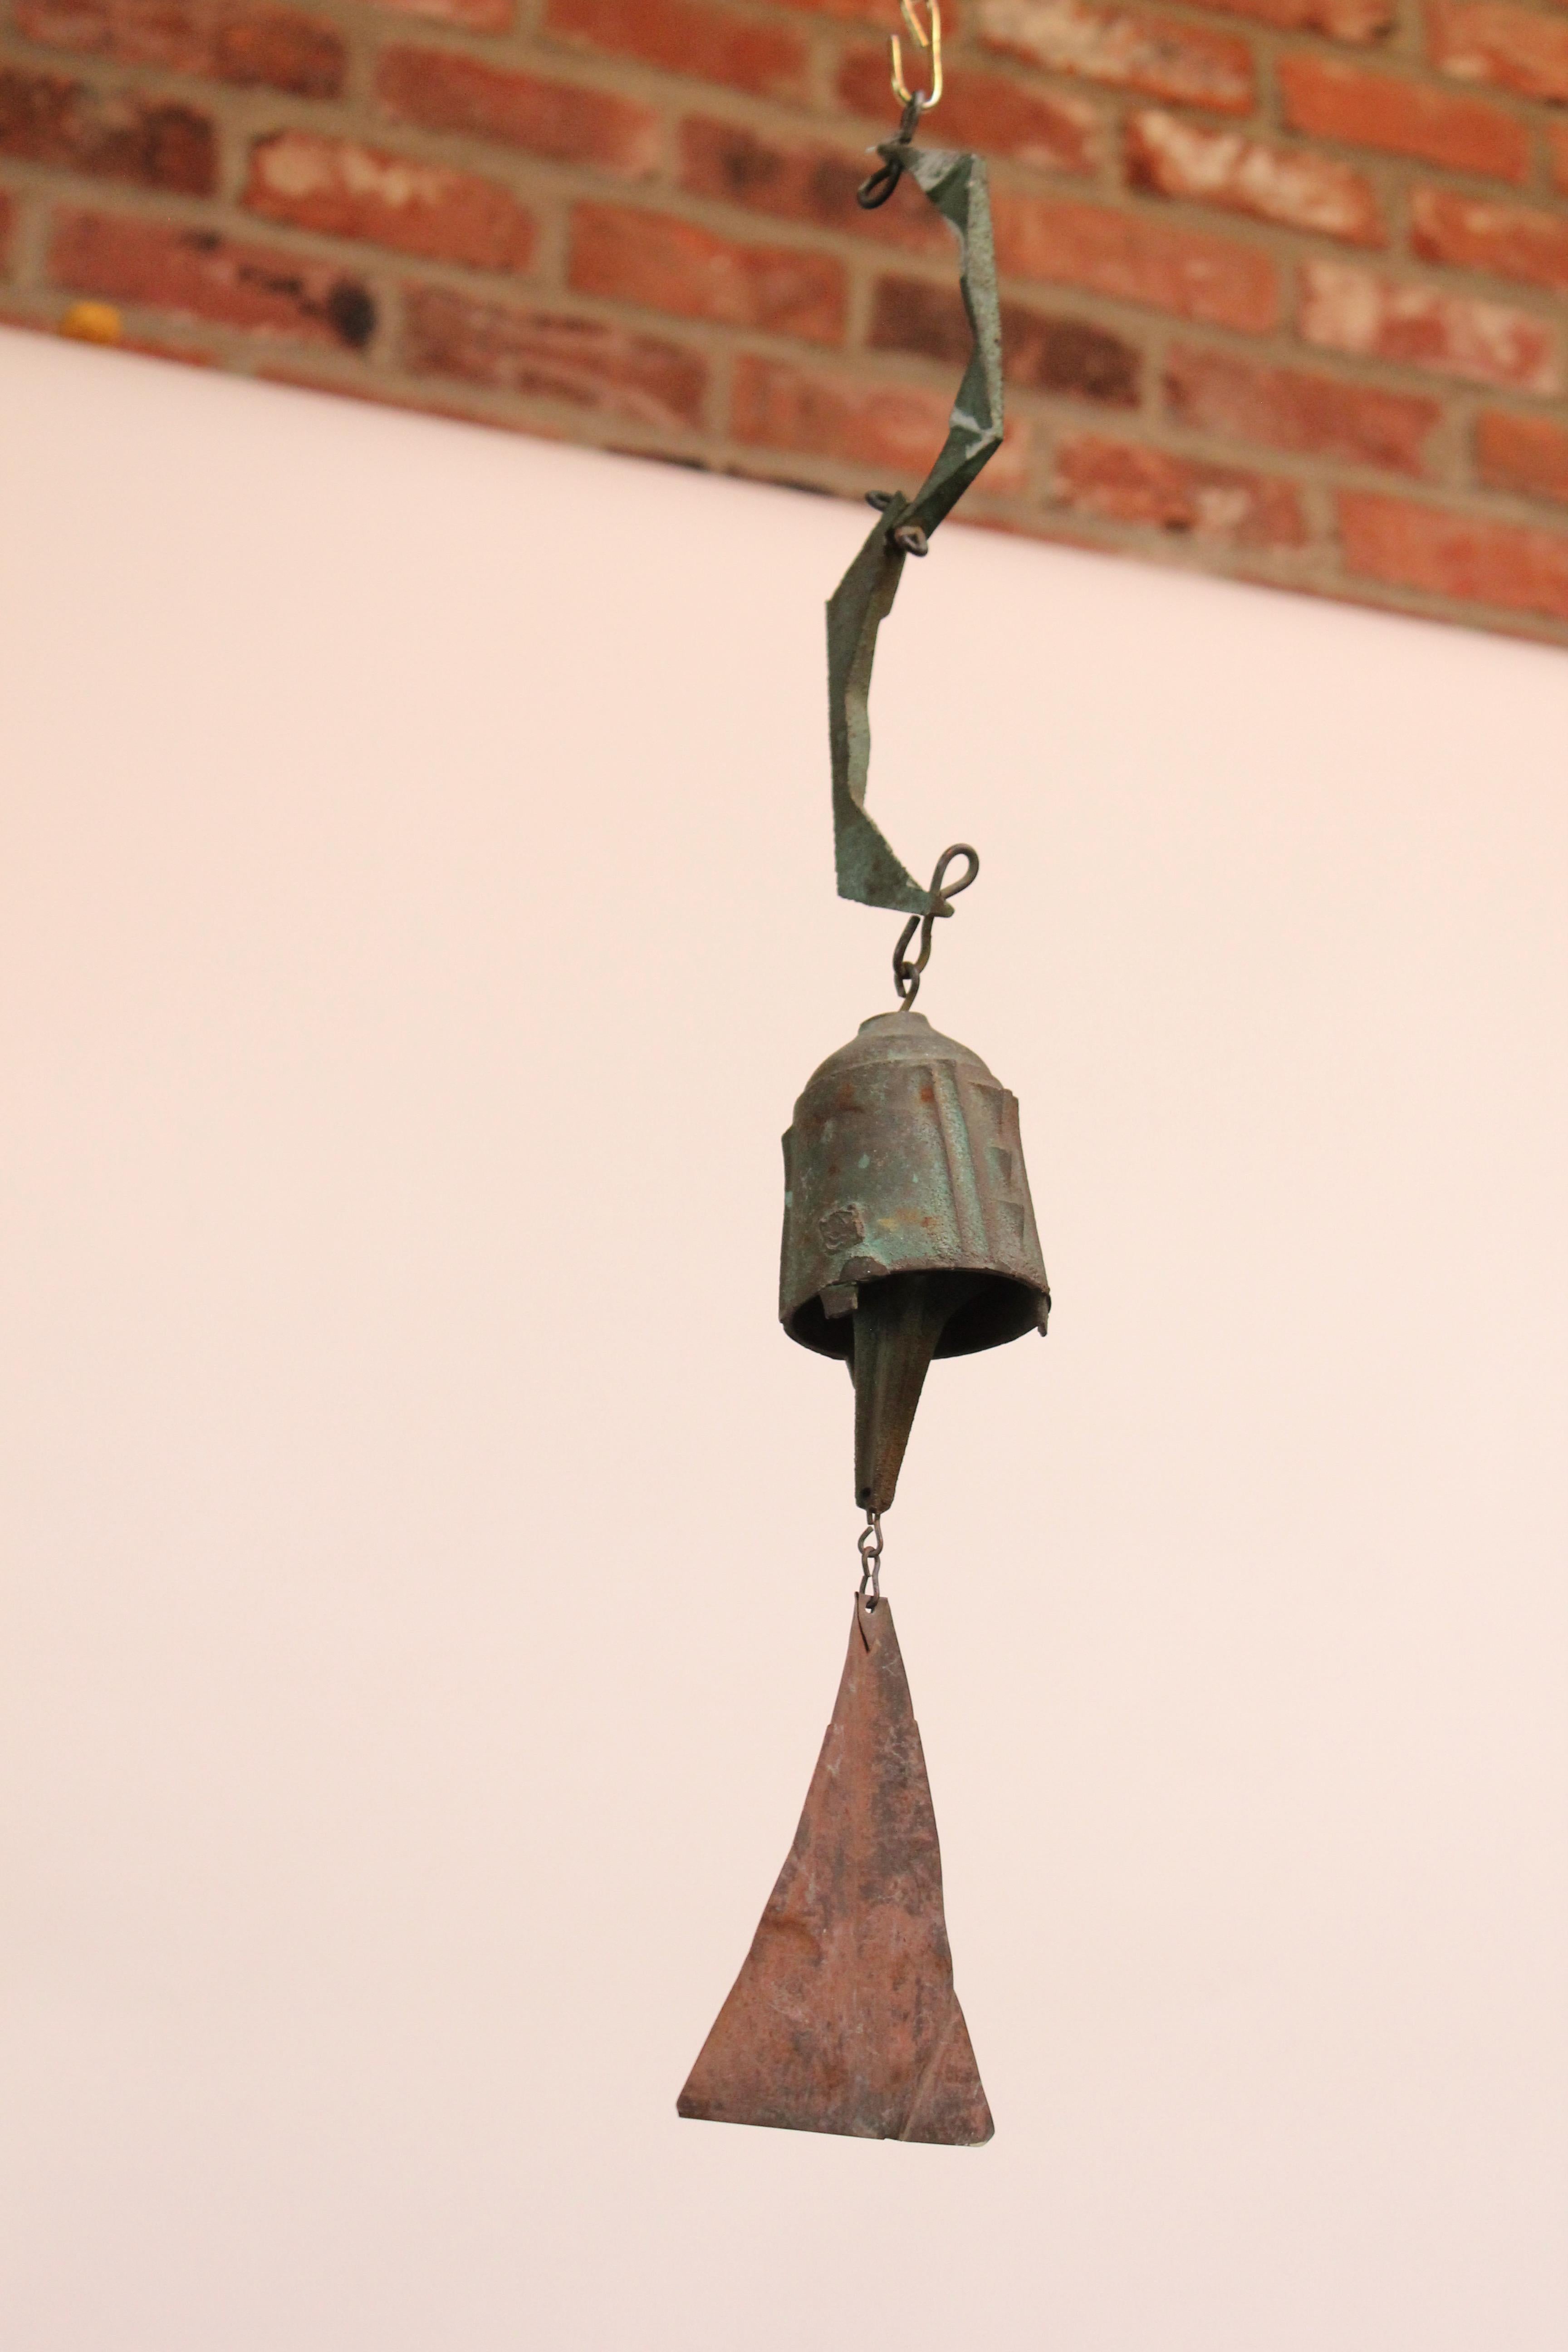 Wind chime / bell designed by architect, Paolo Soleri for Arconsanti (the city he designed and built in Arizona in 1970).
Bronze cast elements with verdigris and oxidized patina throughout from natural age and environmental weathering. 
Branded